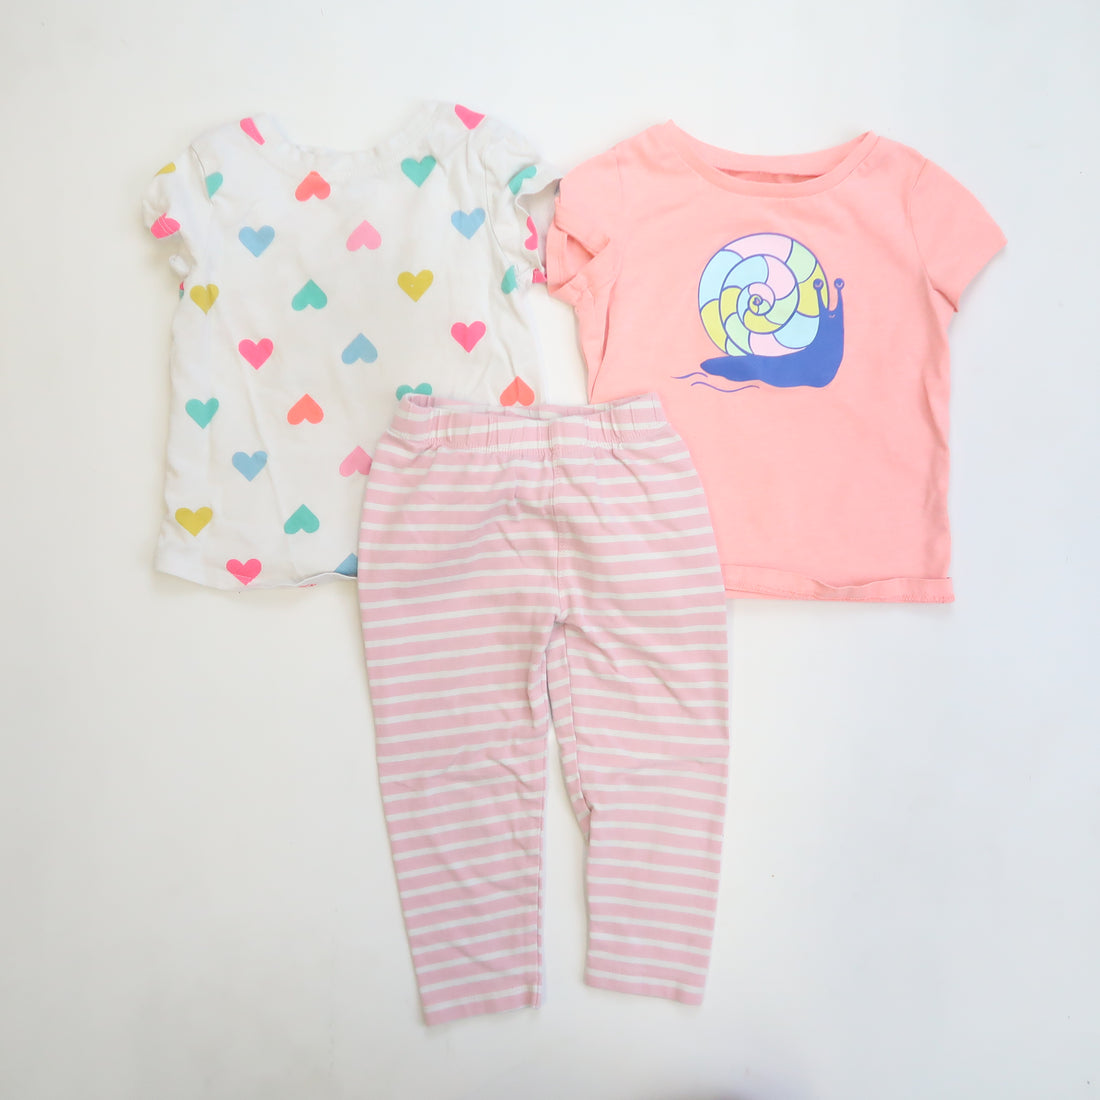 Mixed Brands - Daycare Set (2T)